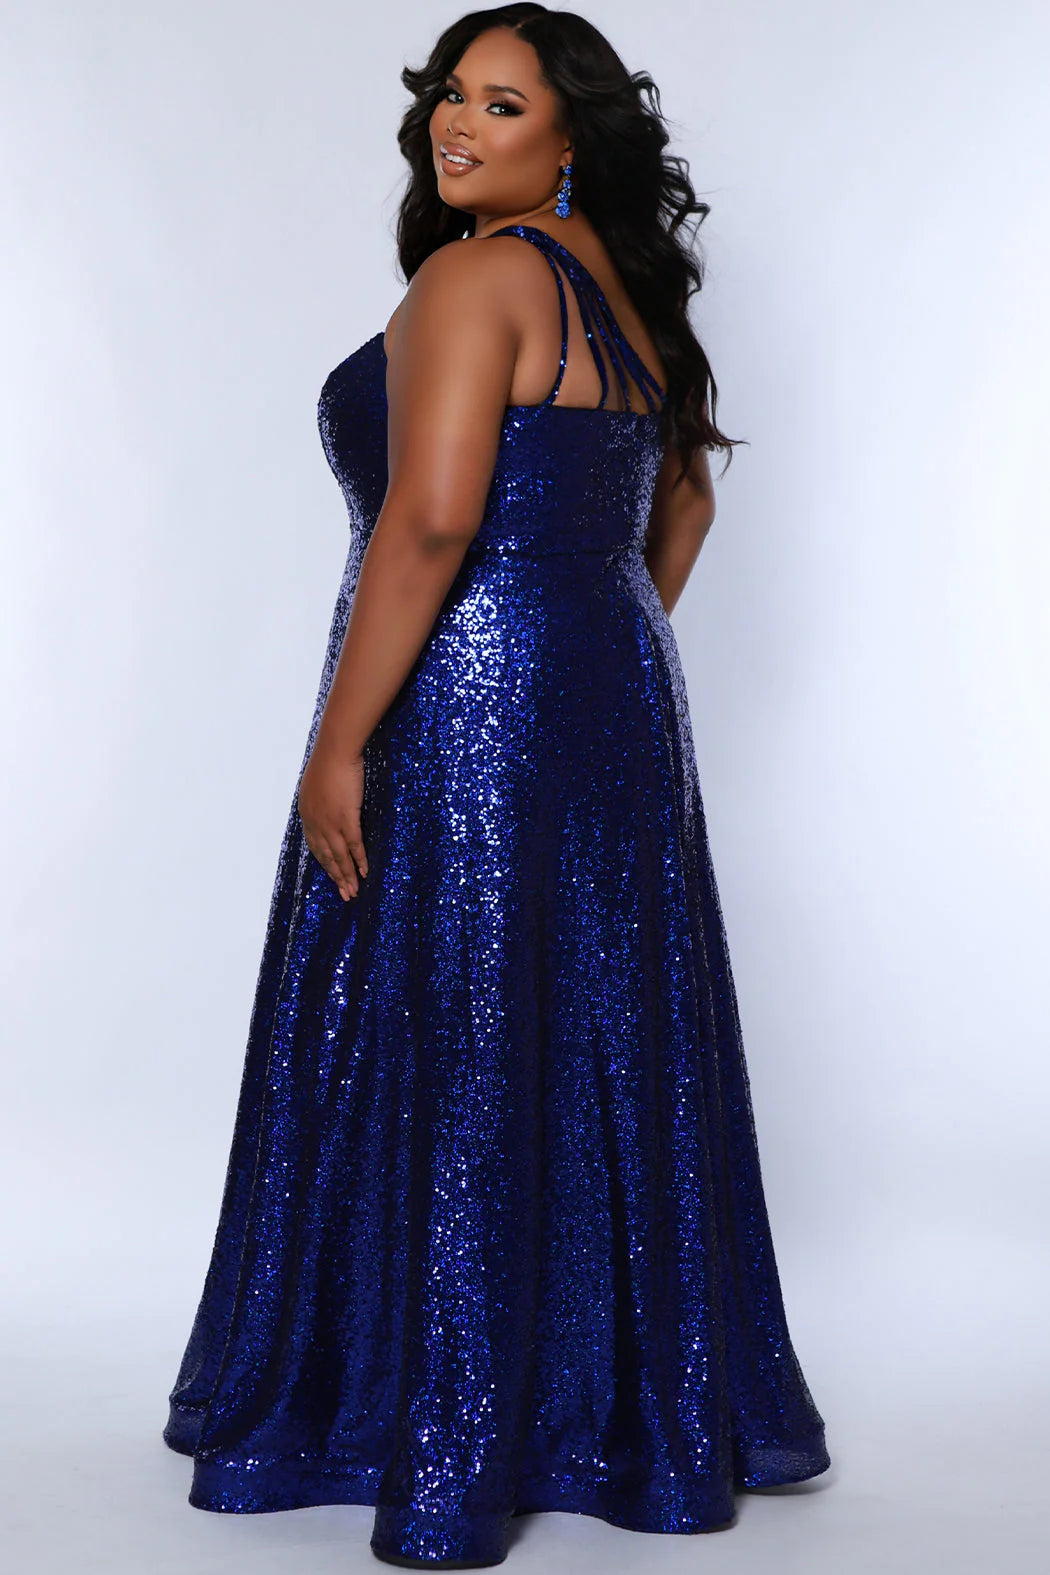 Elevate your look in Sydneys Closet SC7389 Long Prom Dress. This plus size sequin gown features an off-shoulder neckline, A-line silhouette, and pockets for added convenience. Perfect for formal occasions, this dress ensures you'll make a stunning entrance. Be the glamour Queen at Prom 2024 or any formal gala when you sparkle in our 1-shoulder sequin plus size evening dress. 